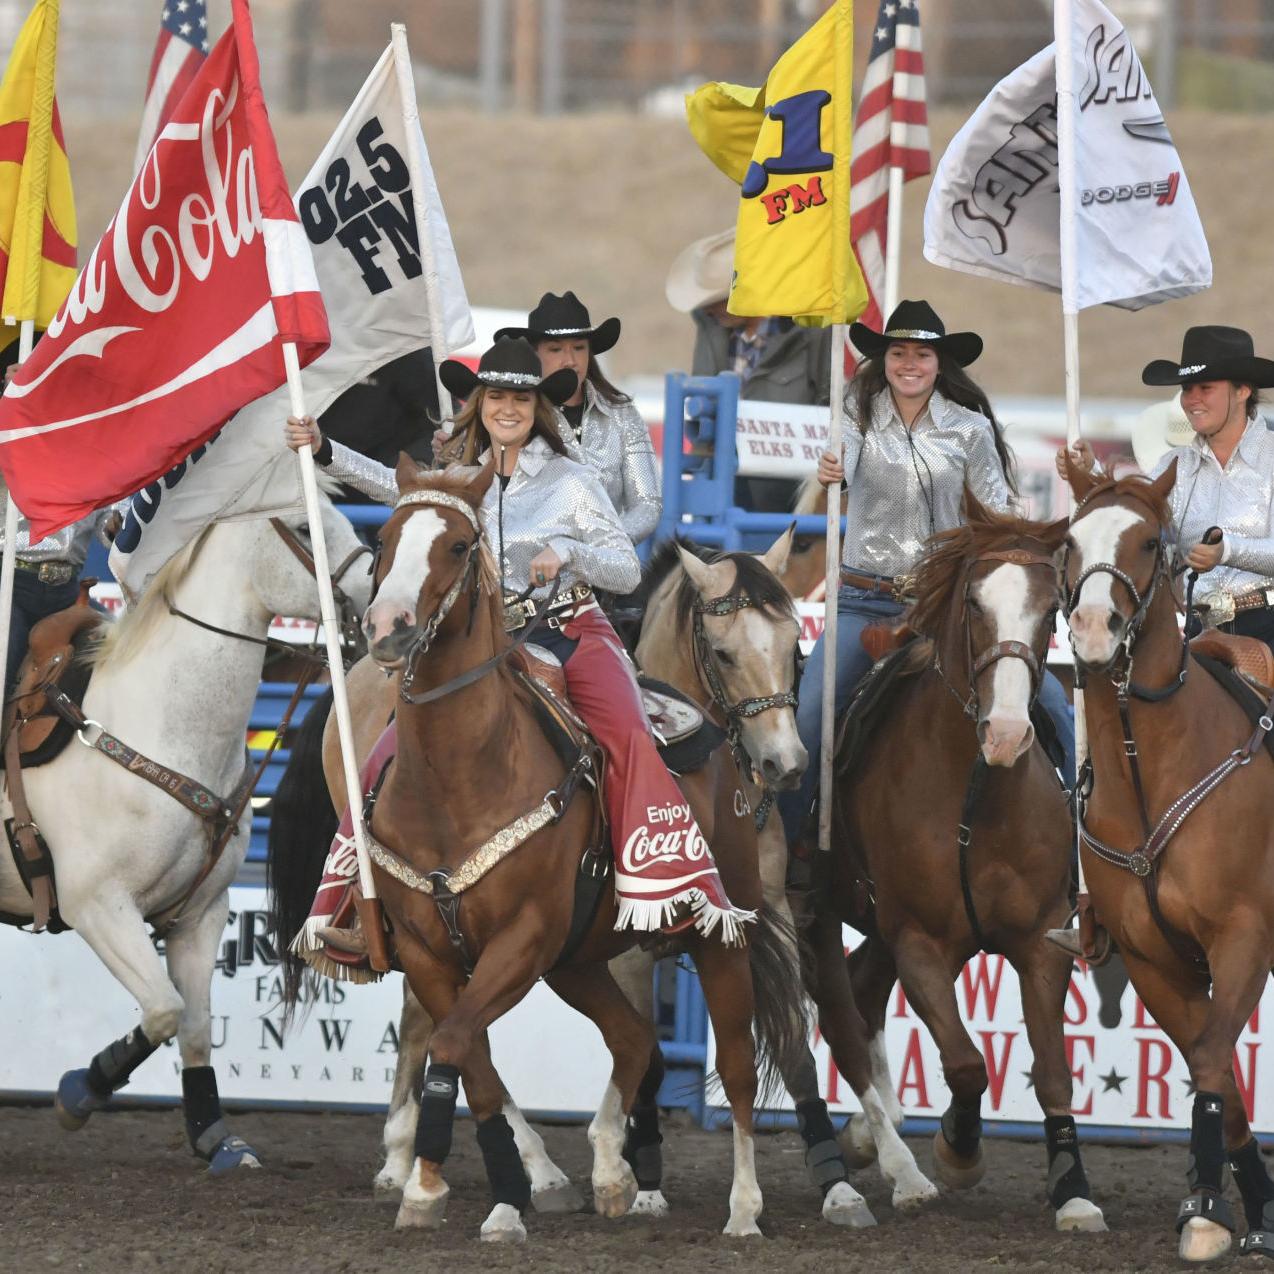 California Rodeo Salinas Live Stream: How to Watch, Start Time, Tv Schedule  